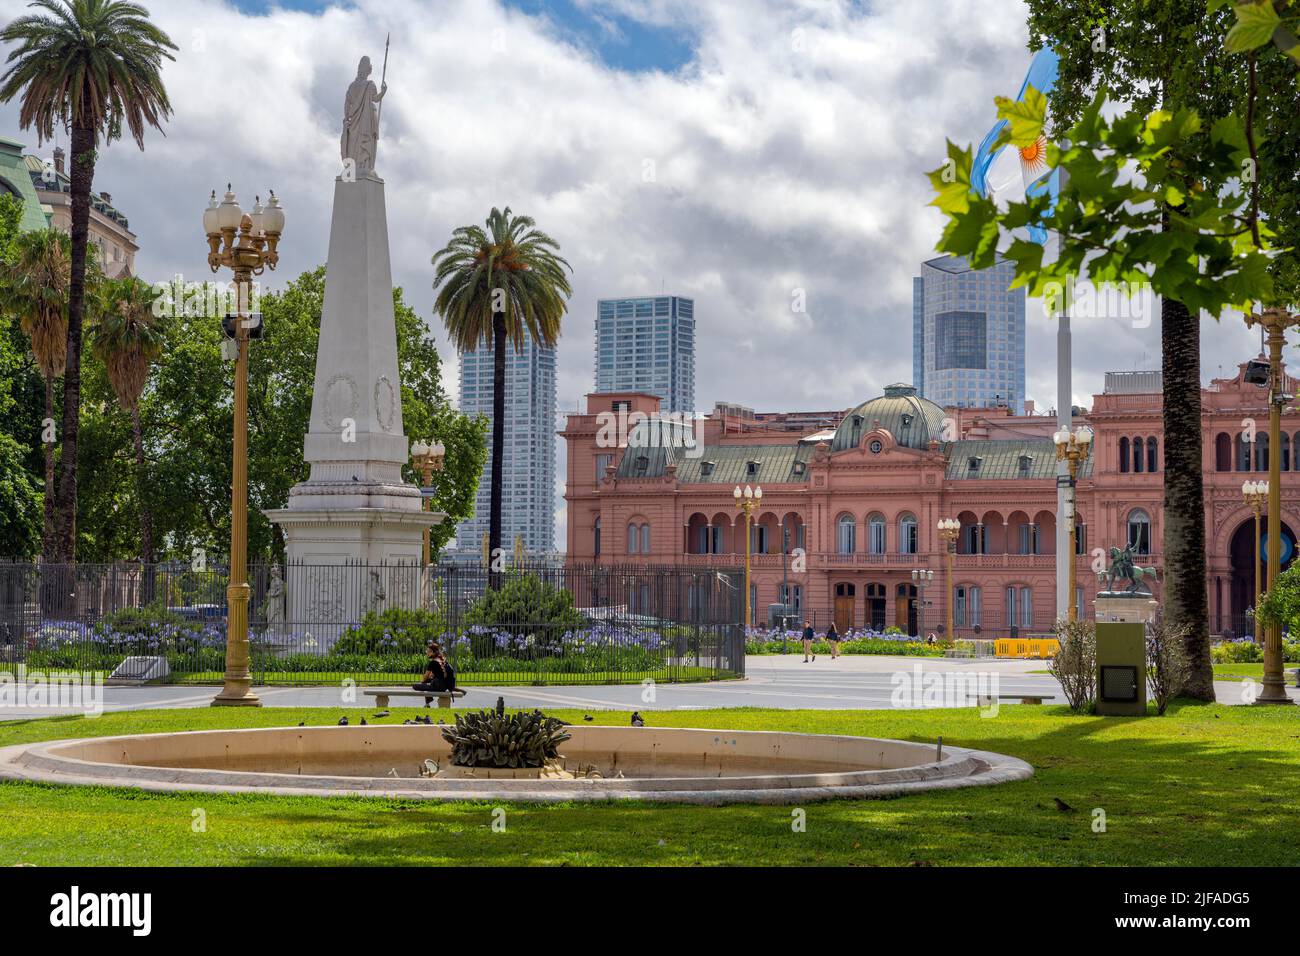 Mayo Square, Buenos Aires, Argentina Stock Photo